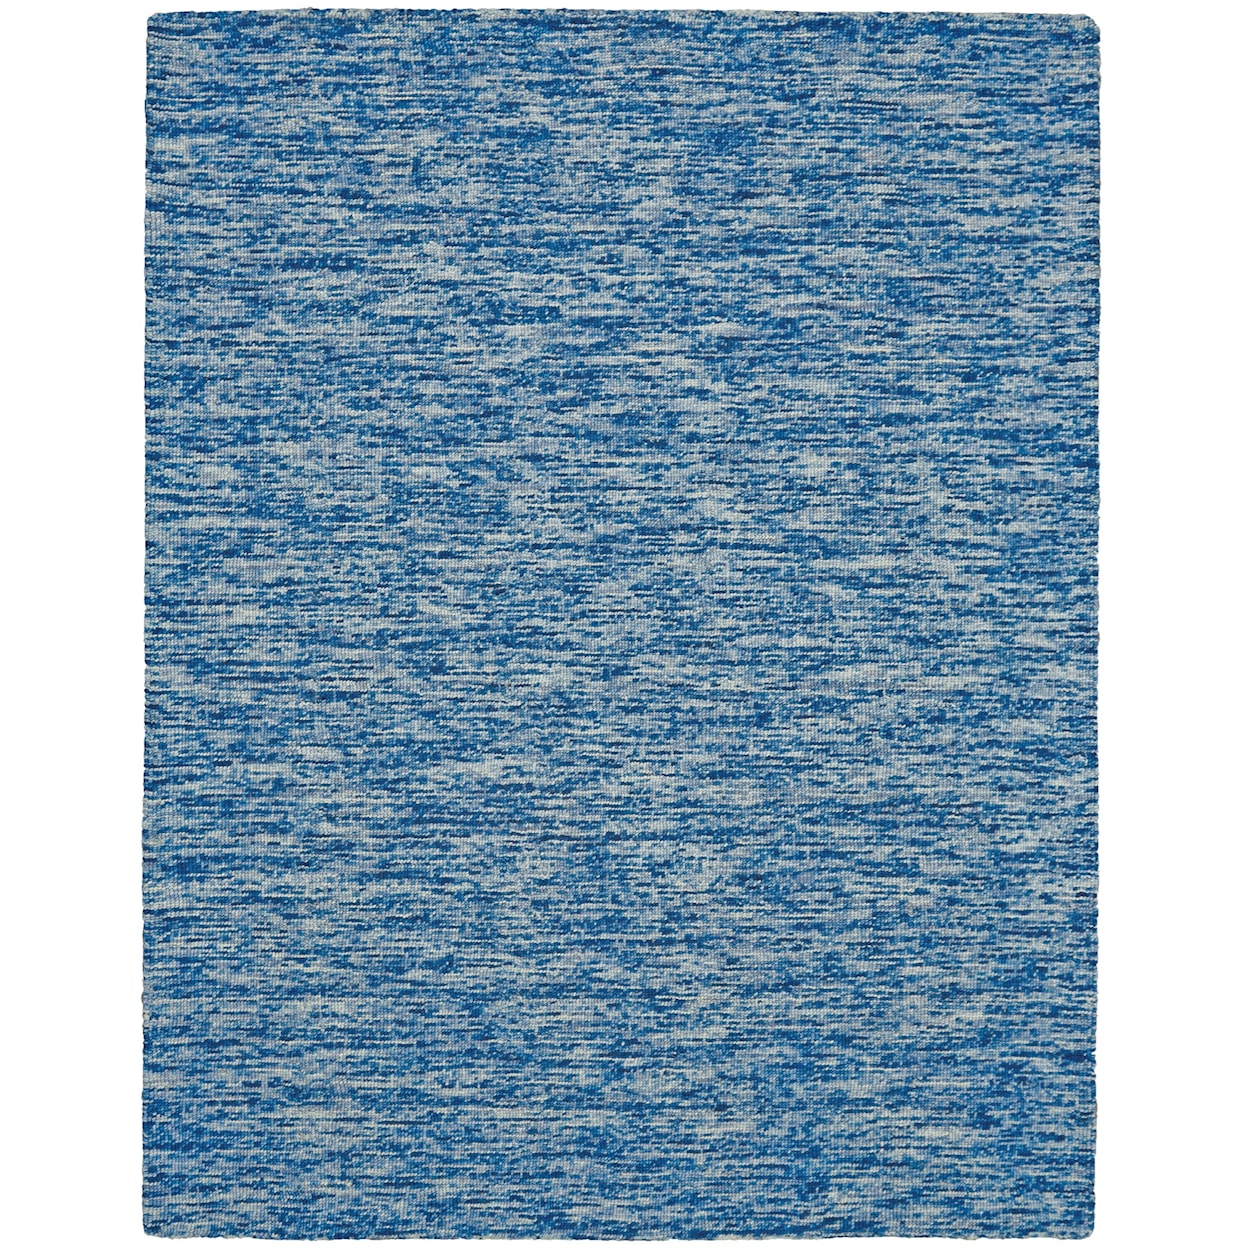 Feizy Rugs Cora Azure 5' x 8' Area Rug